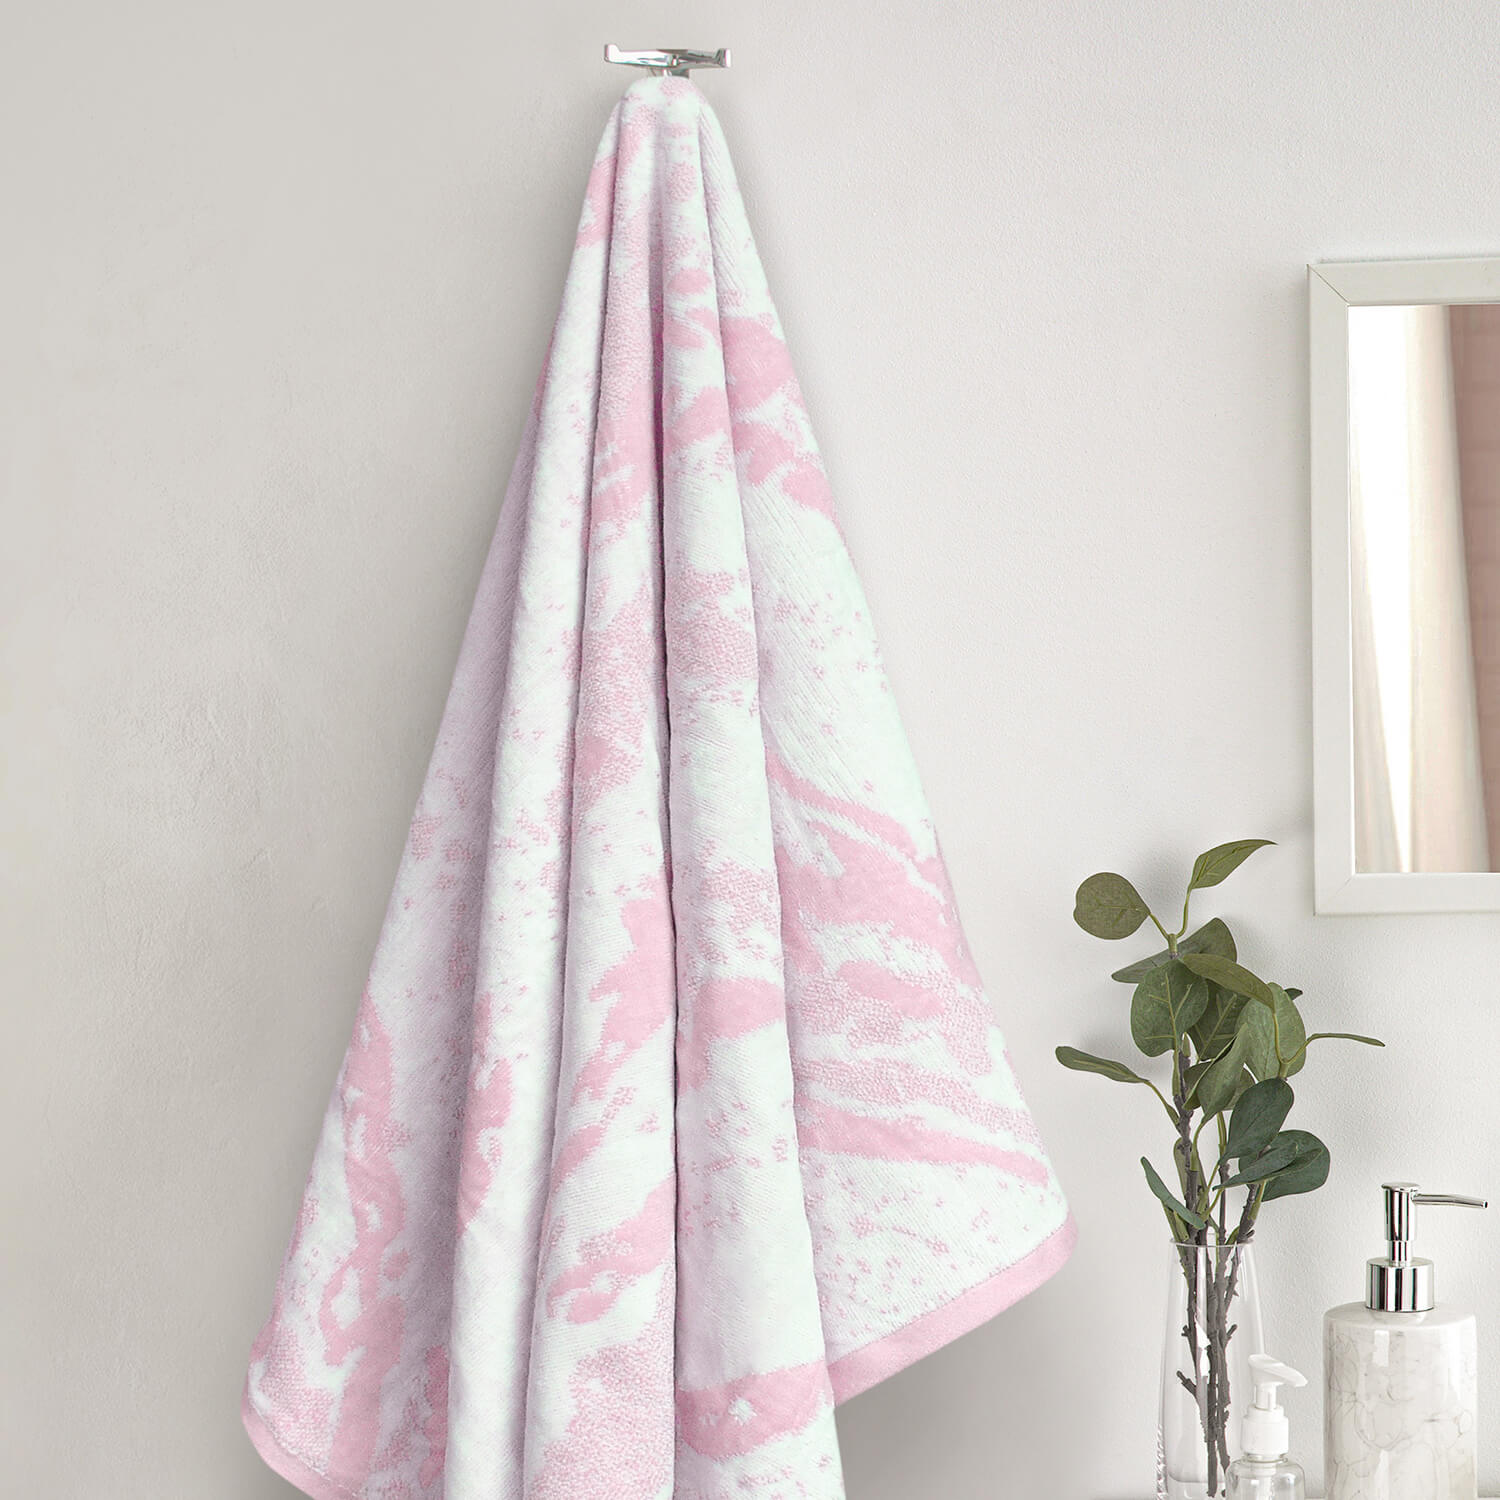 Velosso Marble Bath Towel - Pink 1 Shaws Department Stores